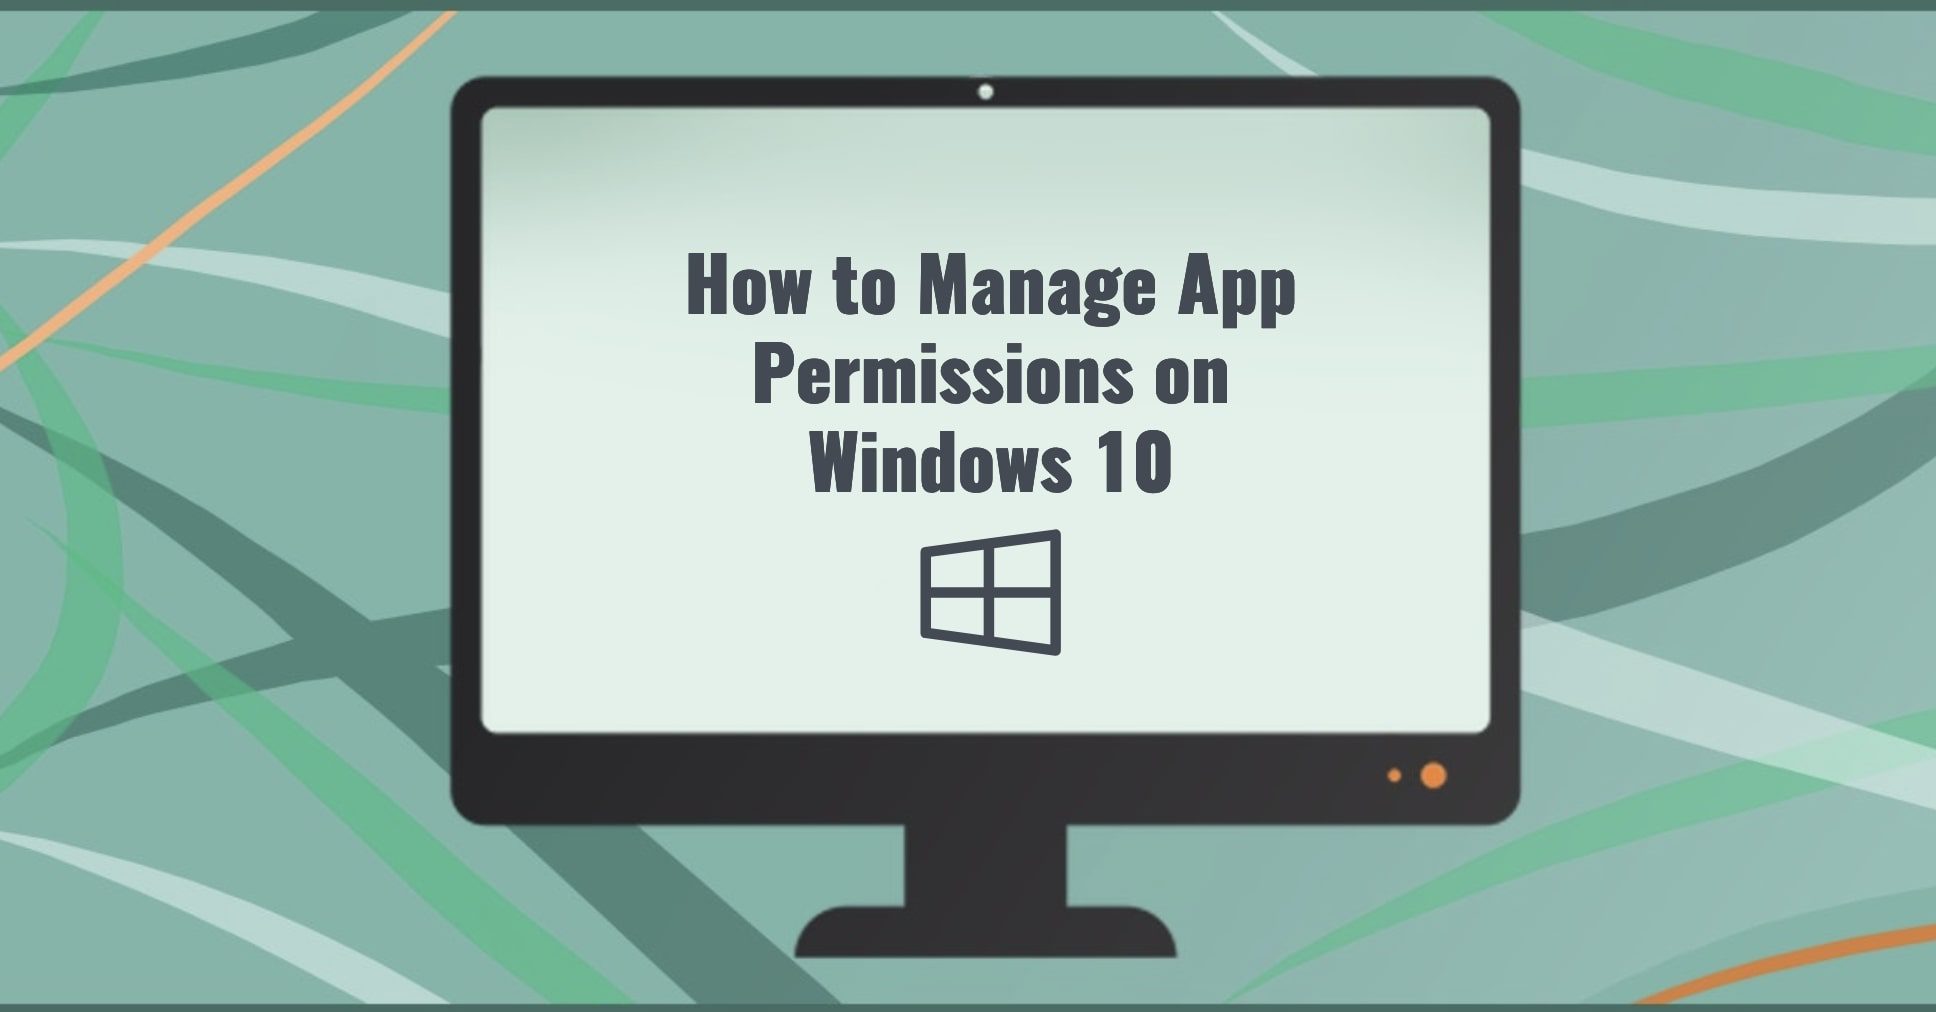 How to Manage App Permissions on Windows 10